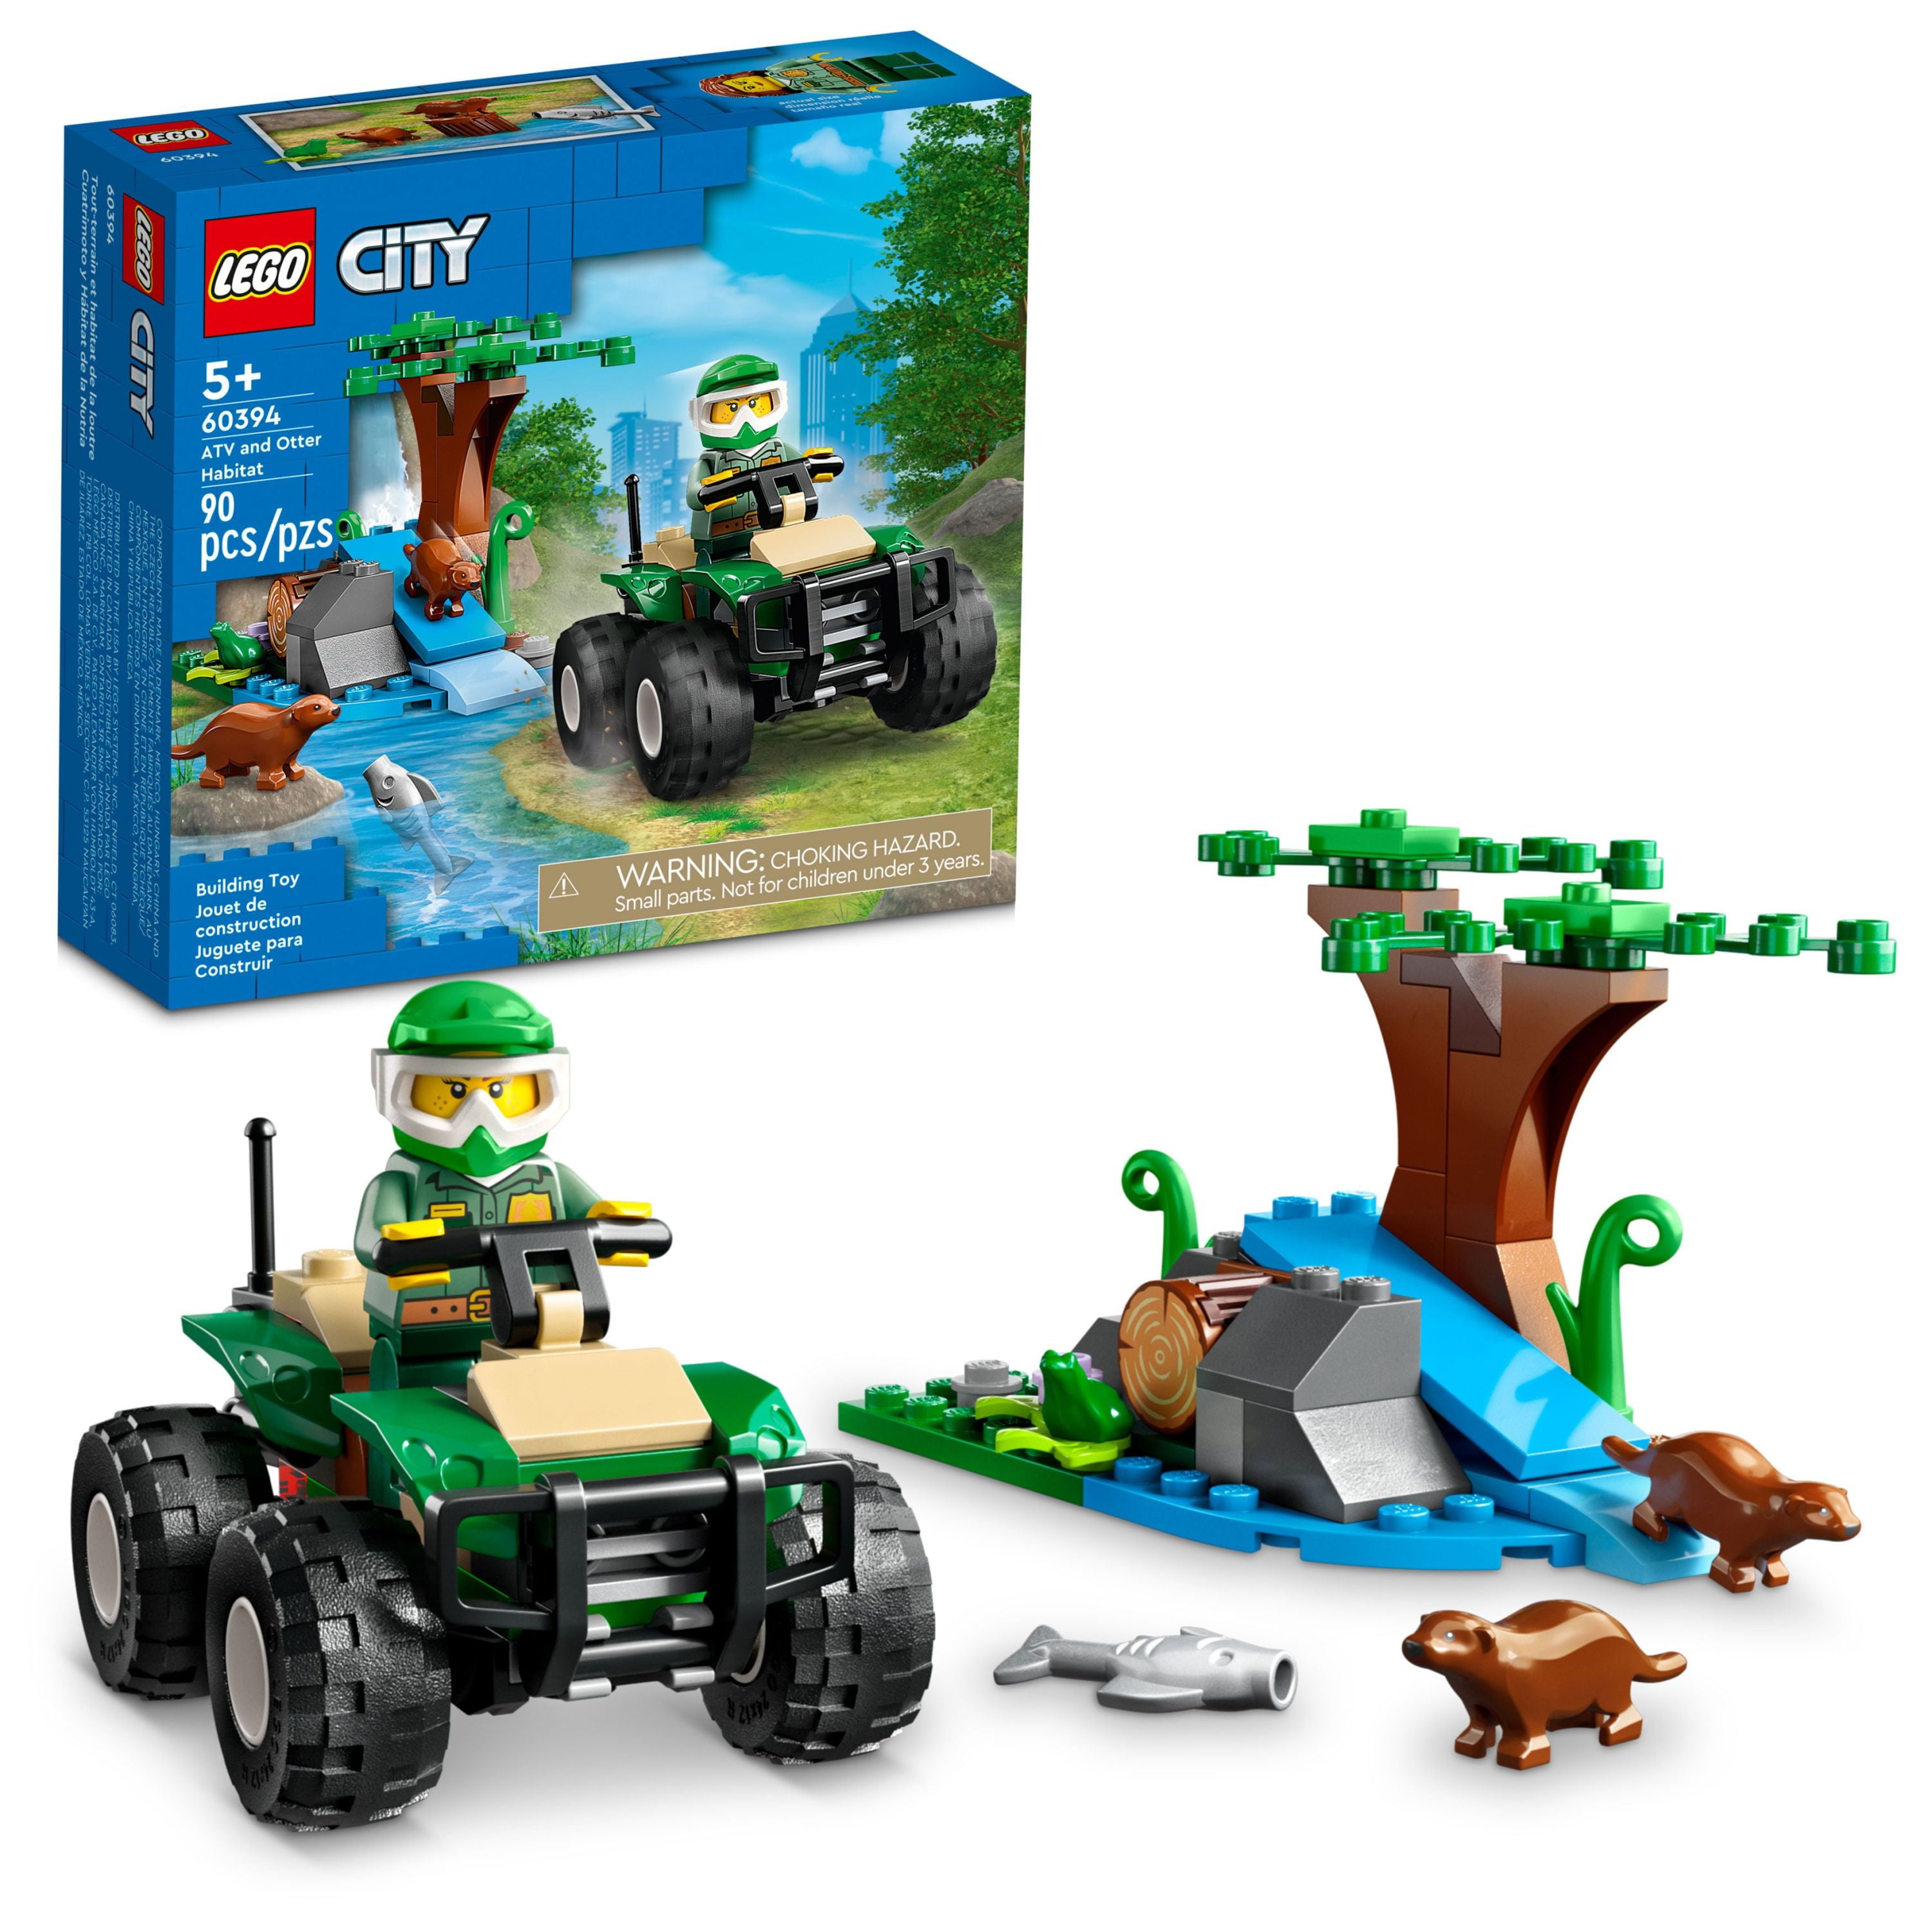 LEGO City ATV and Otter Habitat, 60394 Off-Roader Quad Bike Toy Car for Kids Age 5 Plus, Animal Playset with Wildlife Figures, Learning to Build Nature Set